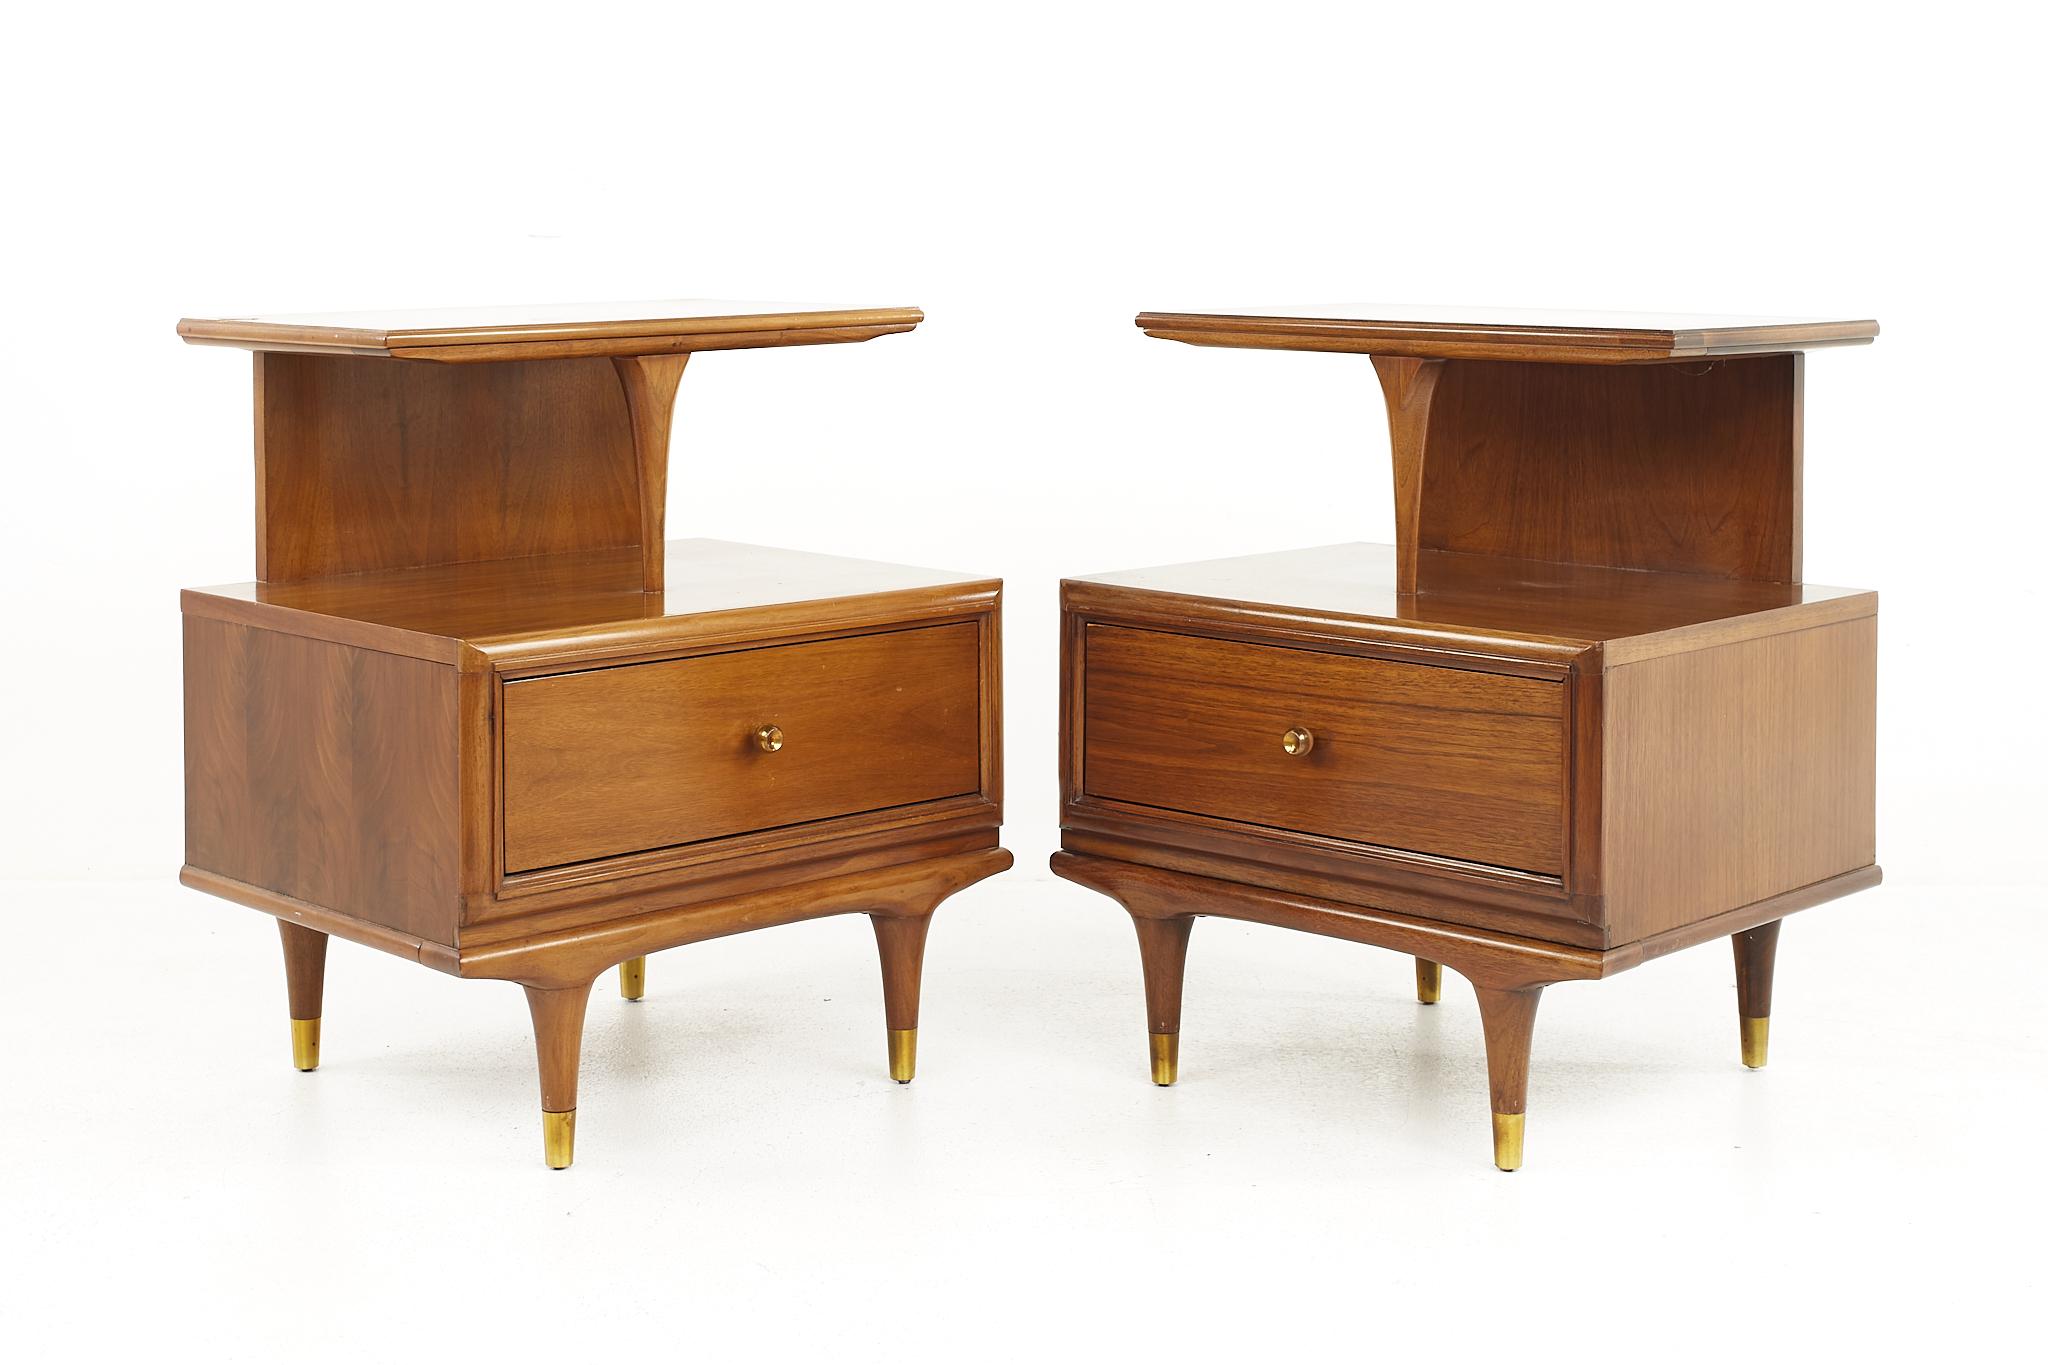 Kent Coffey continental mid century walnut nightstand - a pair.

Each nightstand measures: 22 wide x 18 deep x 26.5 inches high.

All pieces of furniture can be had in what we call restored vintage condition. That means the piece is restored